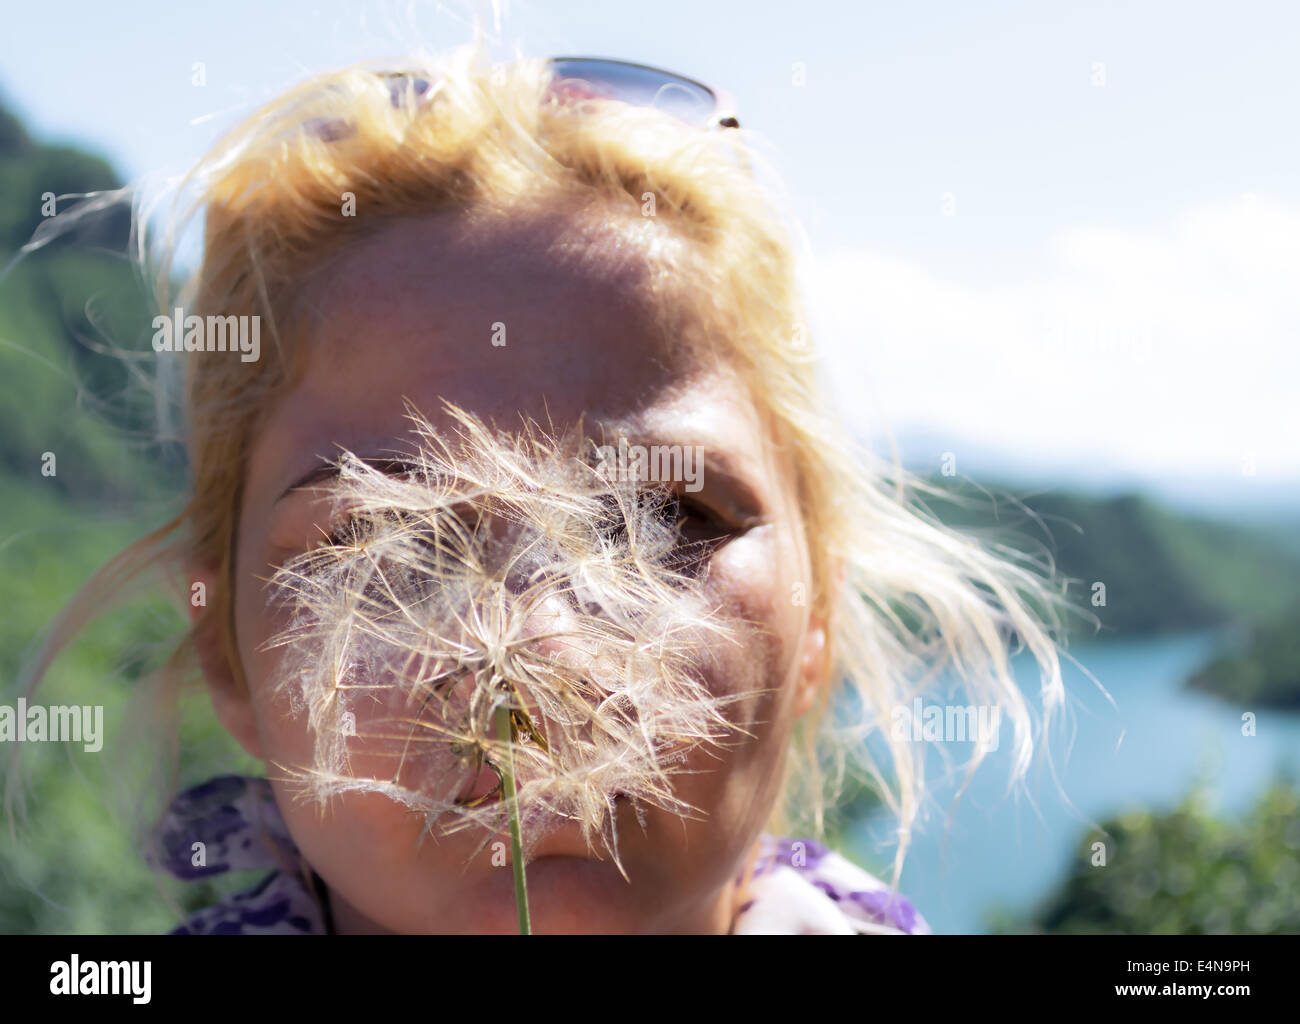 A blond woman blowing on a dandelion to make a wish Stock Photo